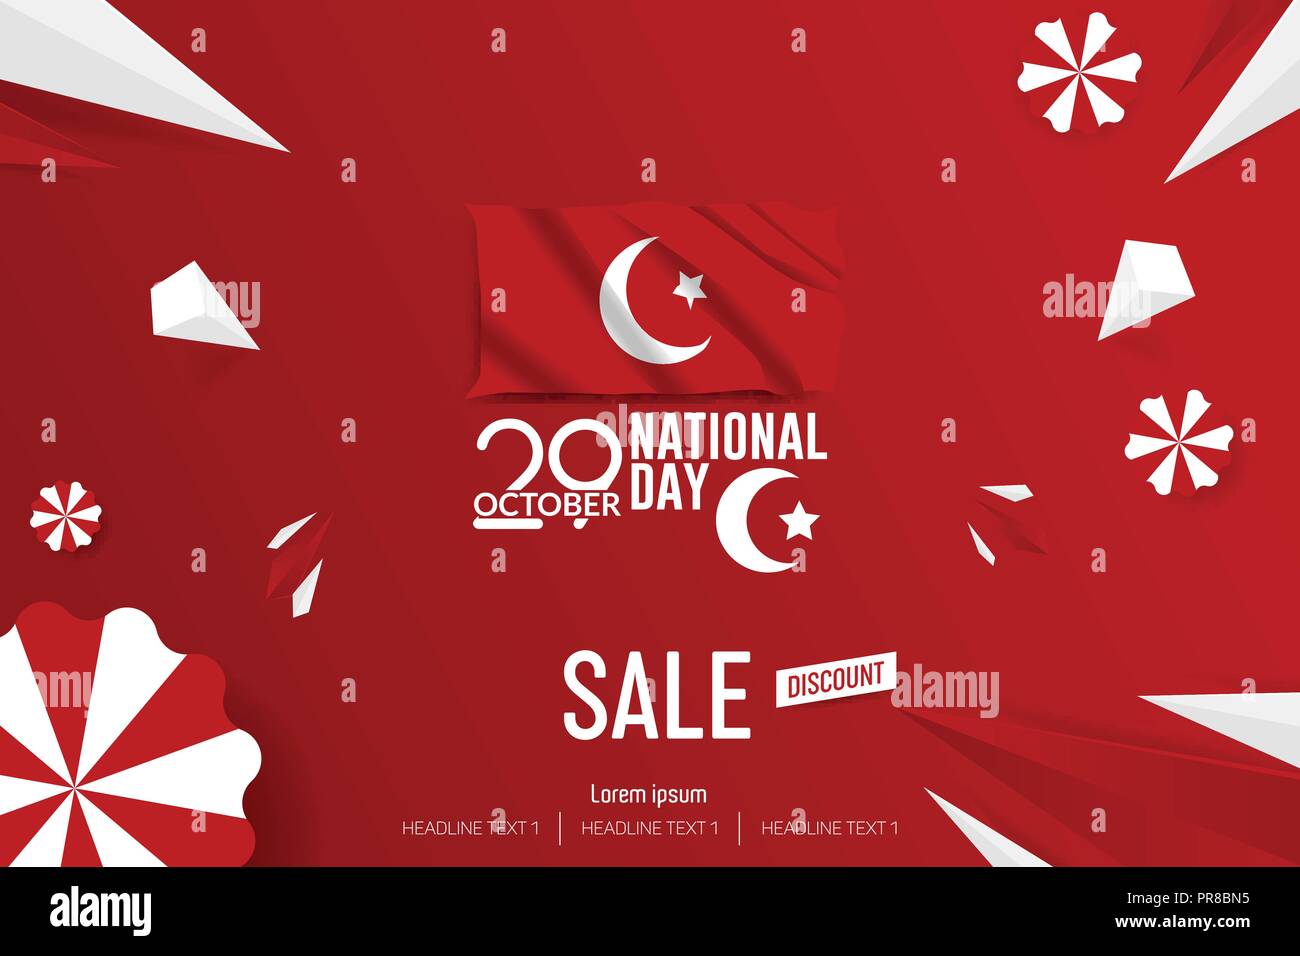 Turkey Independence Day Sale Vector Background Illustration Stock Vector